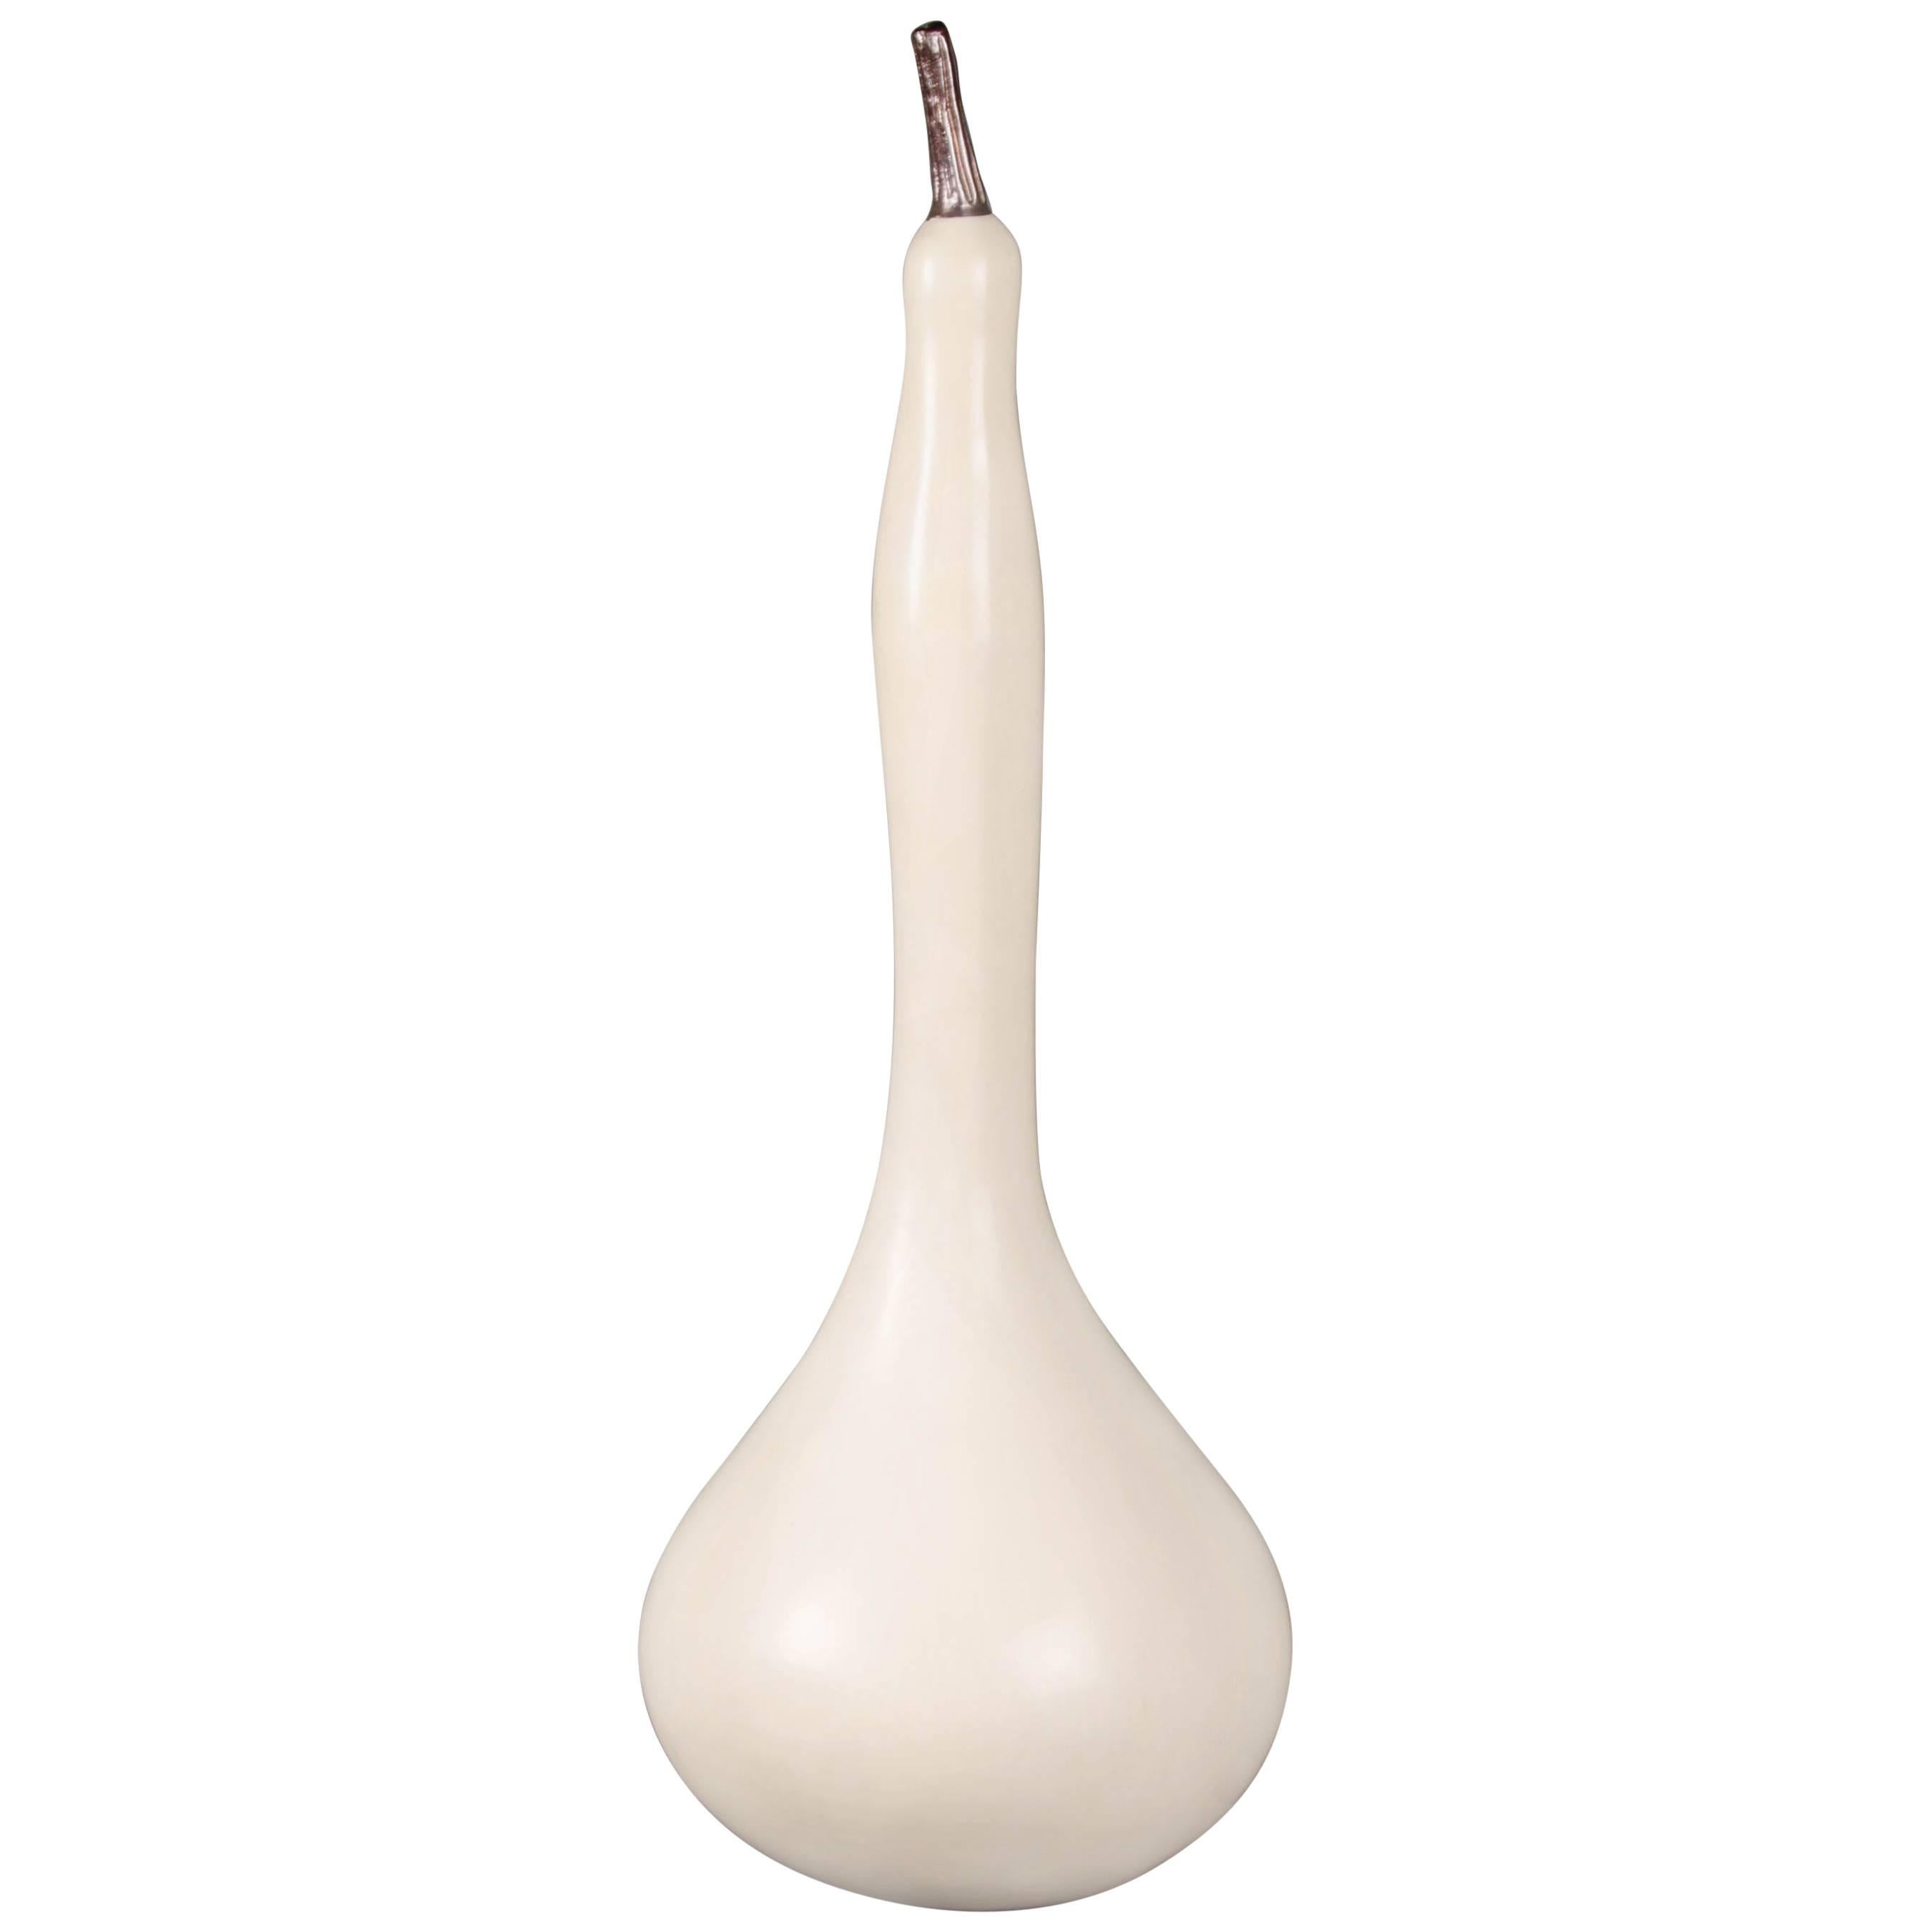 Standing Gourd Sculpture, Cream Lacquer by Robert Kuo, Limited Edition